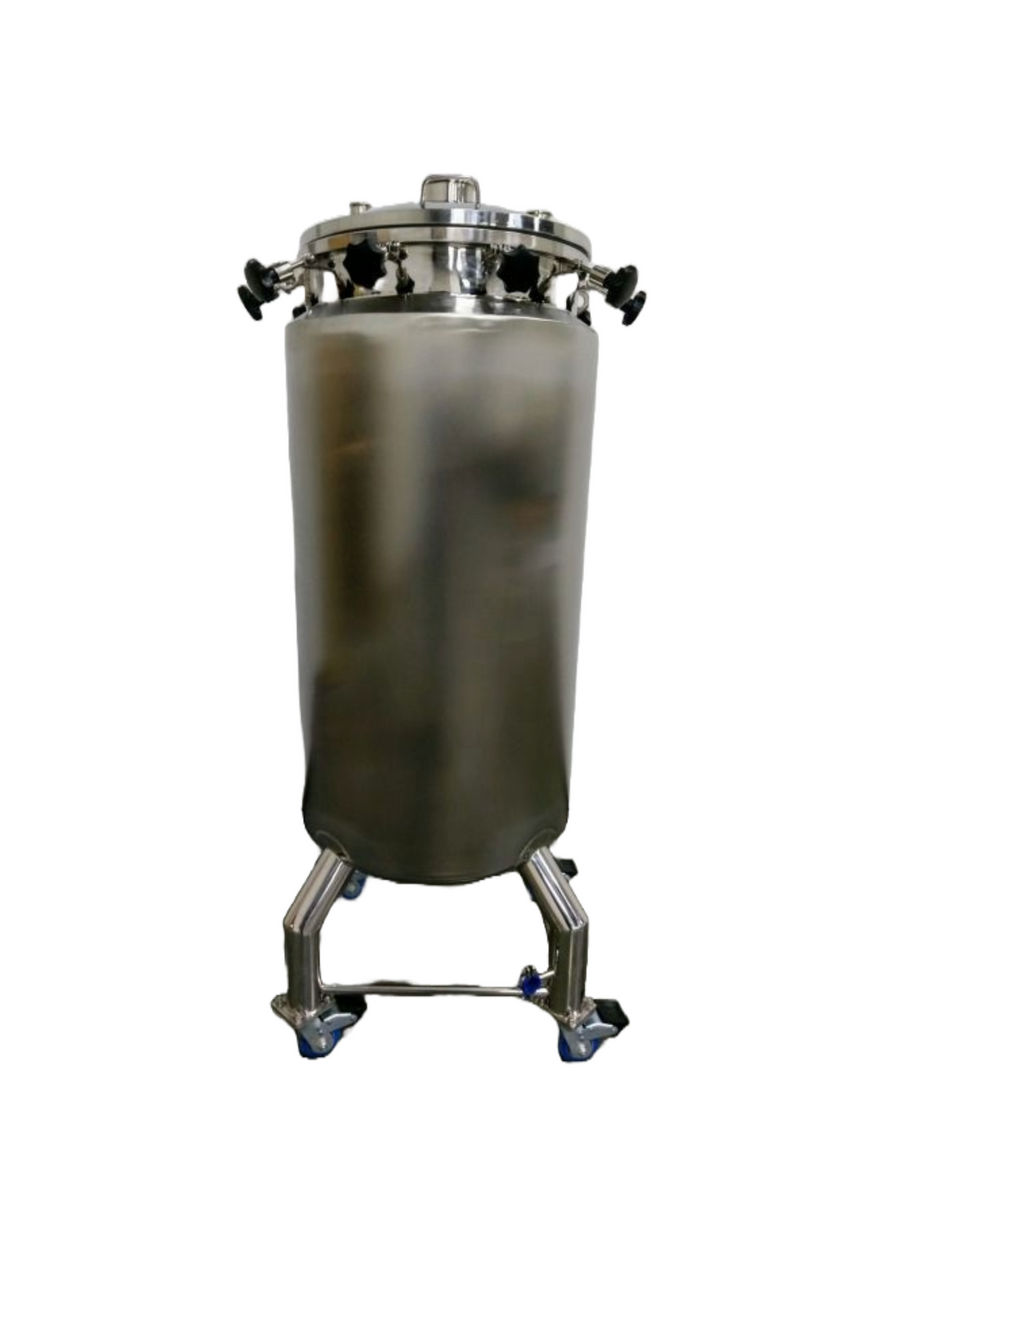 Glacier Tanks Material Processing Vessel, 100 Gallon Tank - Jacketed